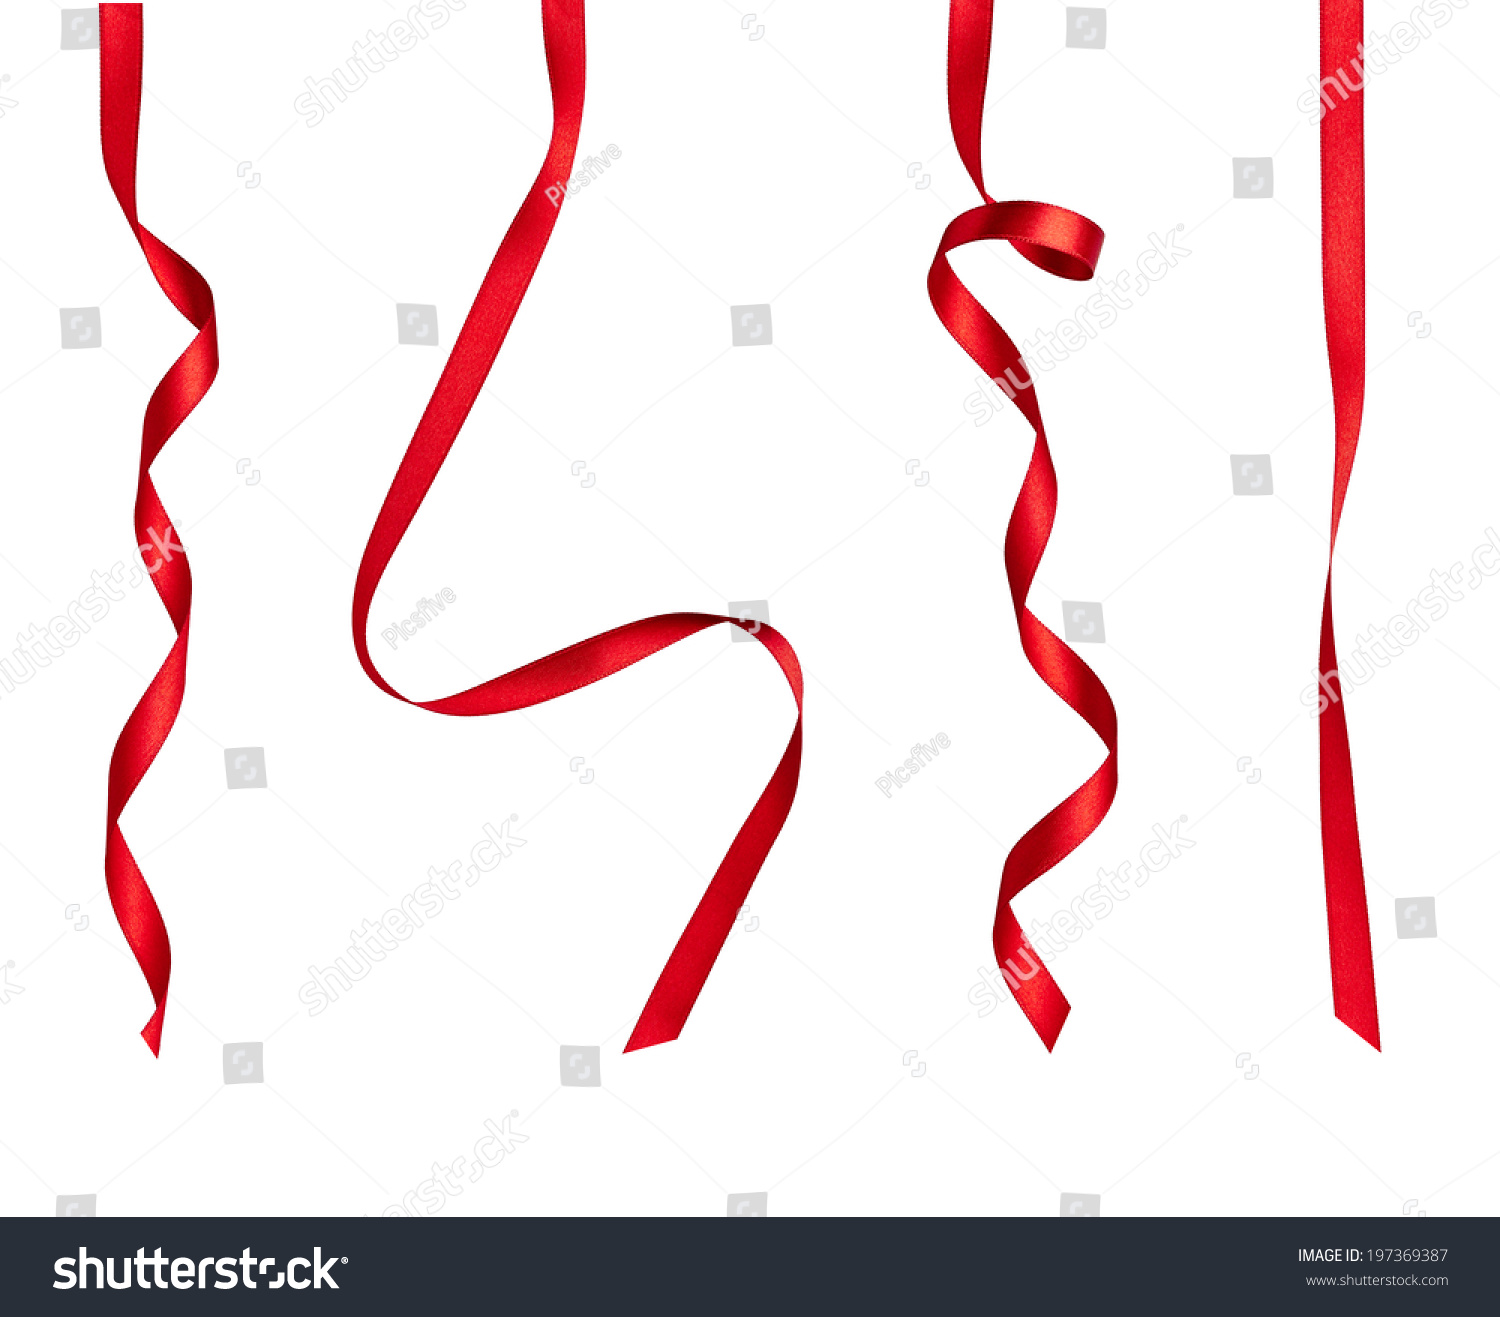 collection of  various red ribbon pieces on white background. each one is shot separately #197369387